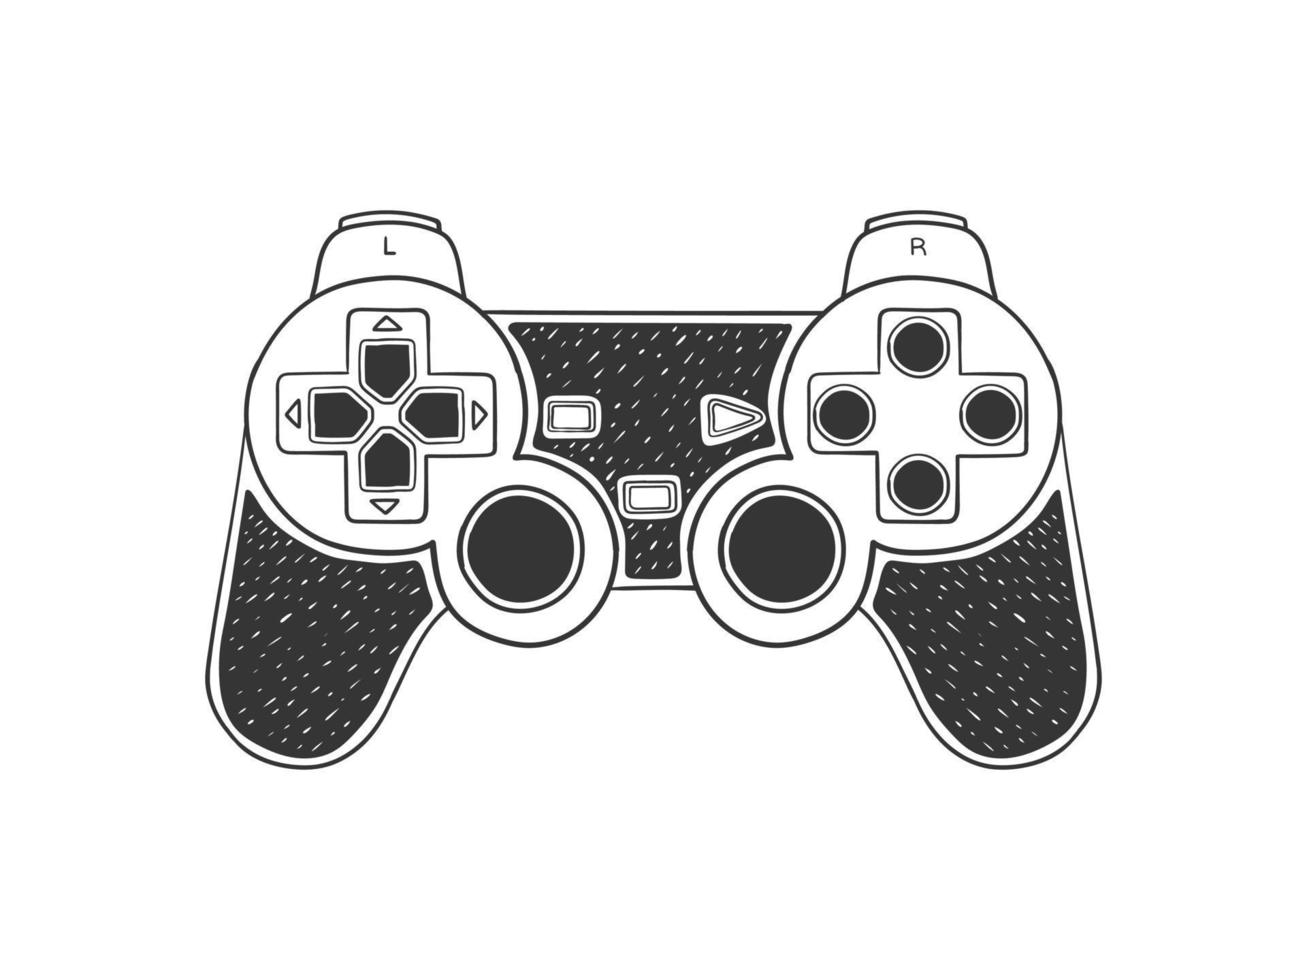 Joypad. Joystick for game console. Hand-drawn Gamepad. Illustration in sketch style. Vector image